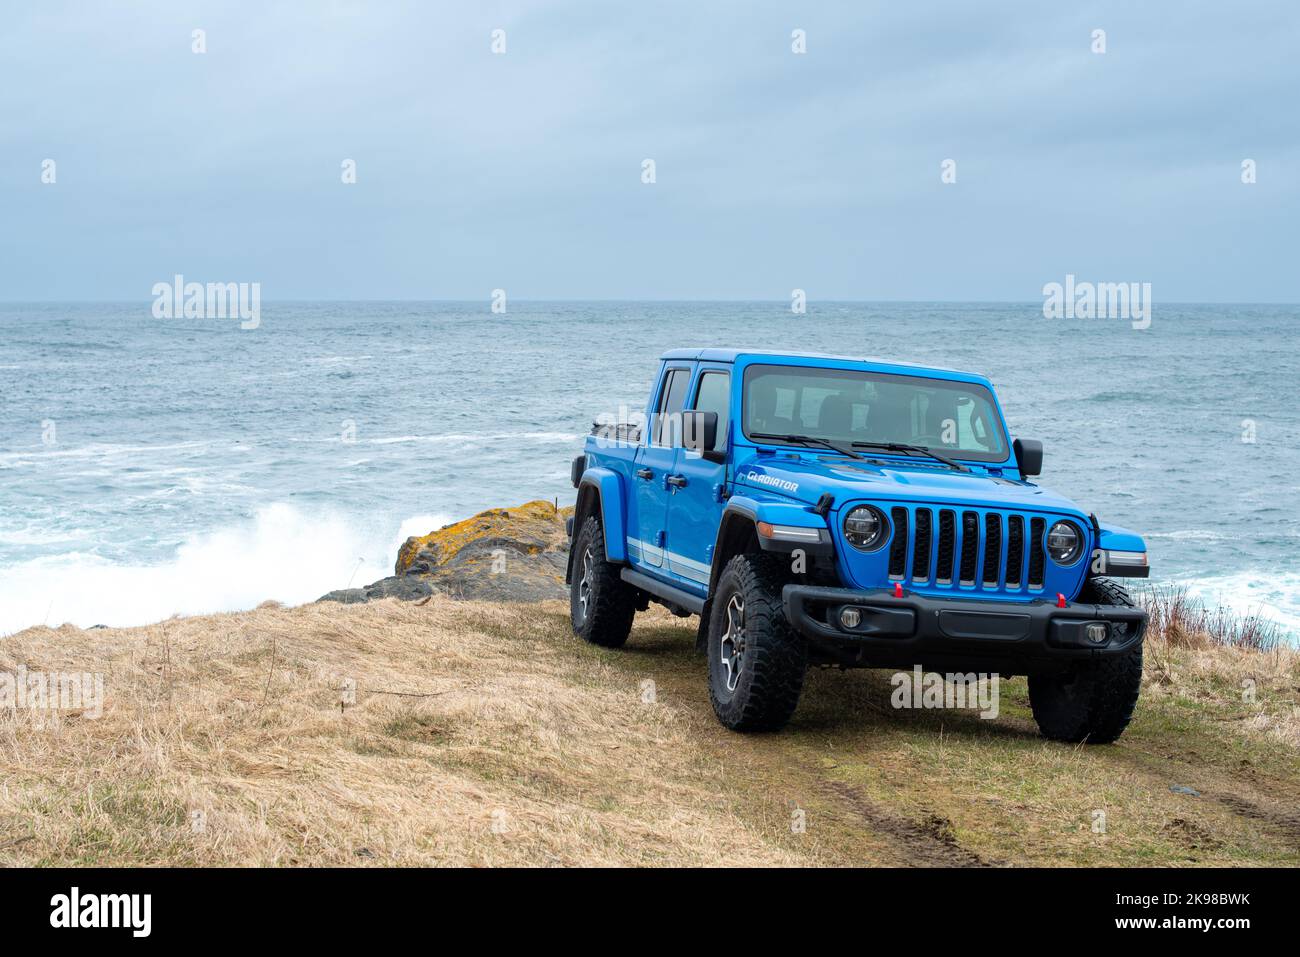 St. John's, Newfoundland, Canada, August 2022: A vibrant blue Jeep Gladiator Rubicon truck 4x4 off road and parked on an old airport runway. Stock Photo